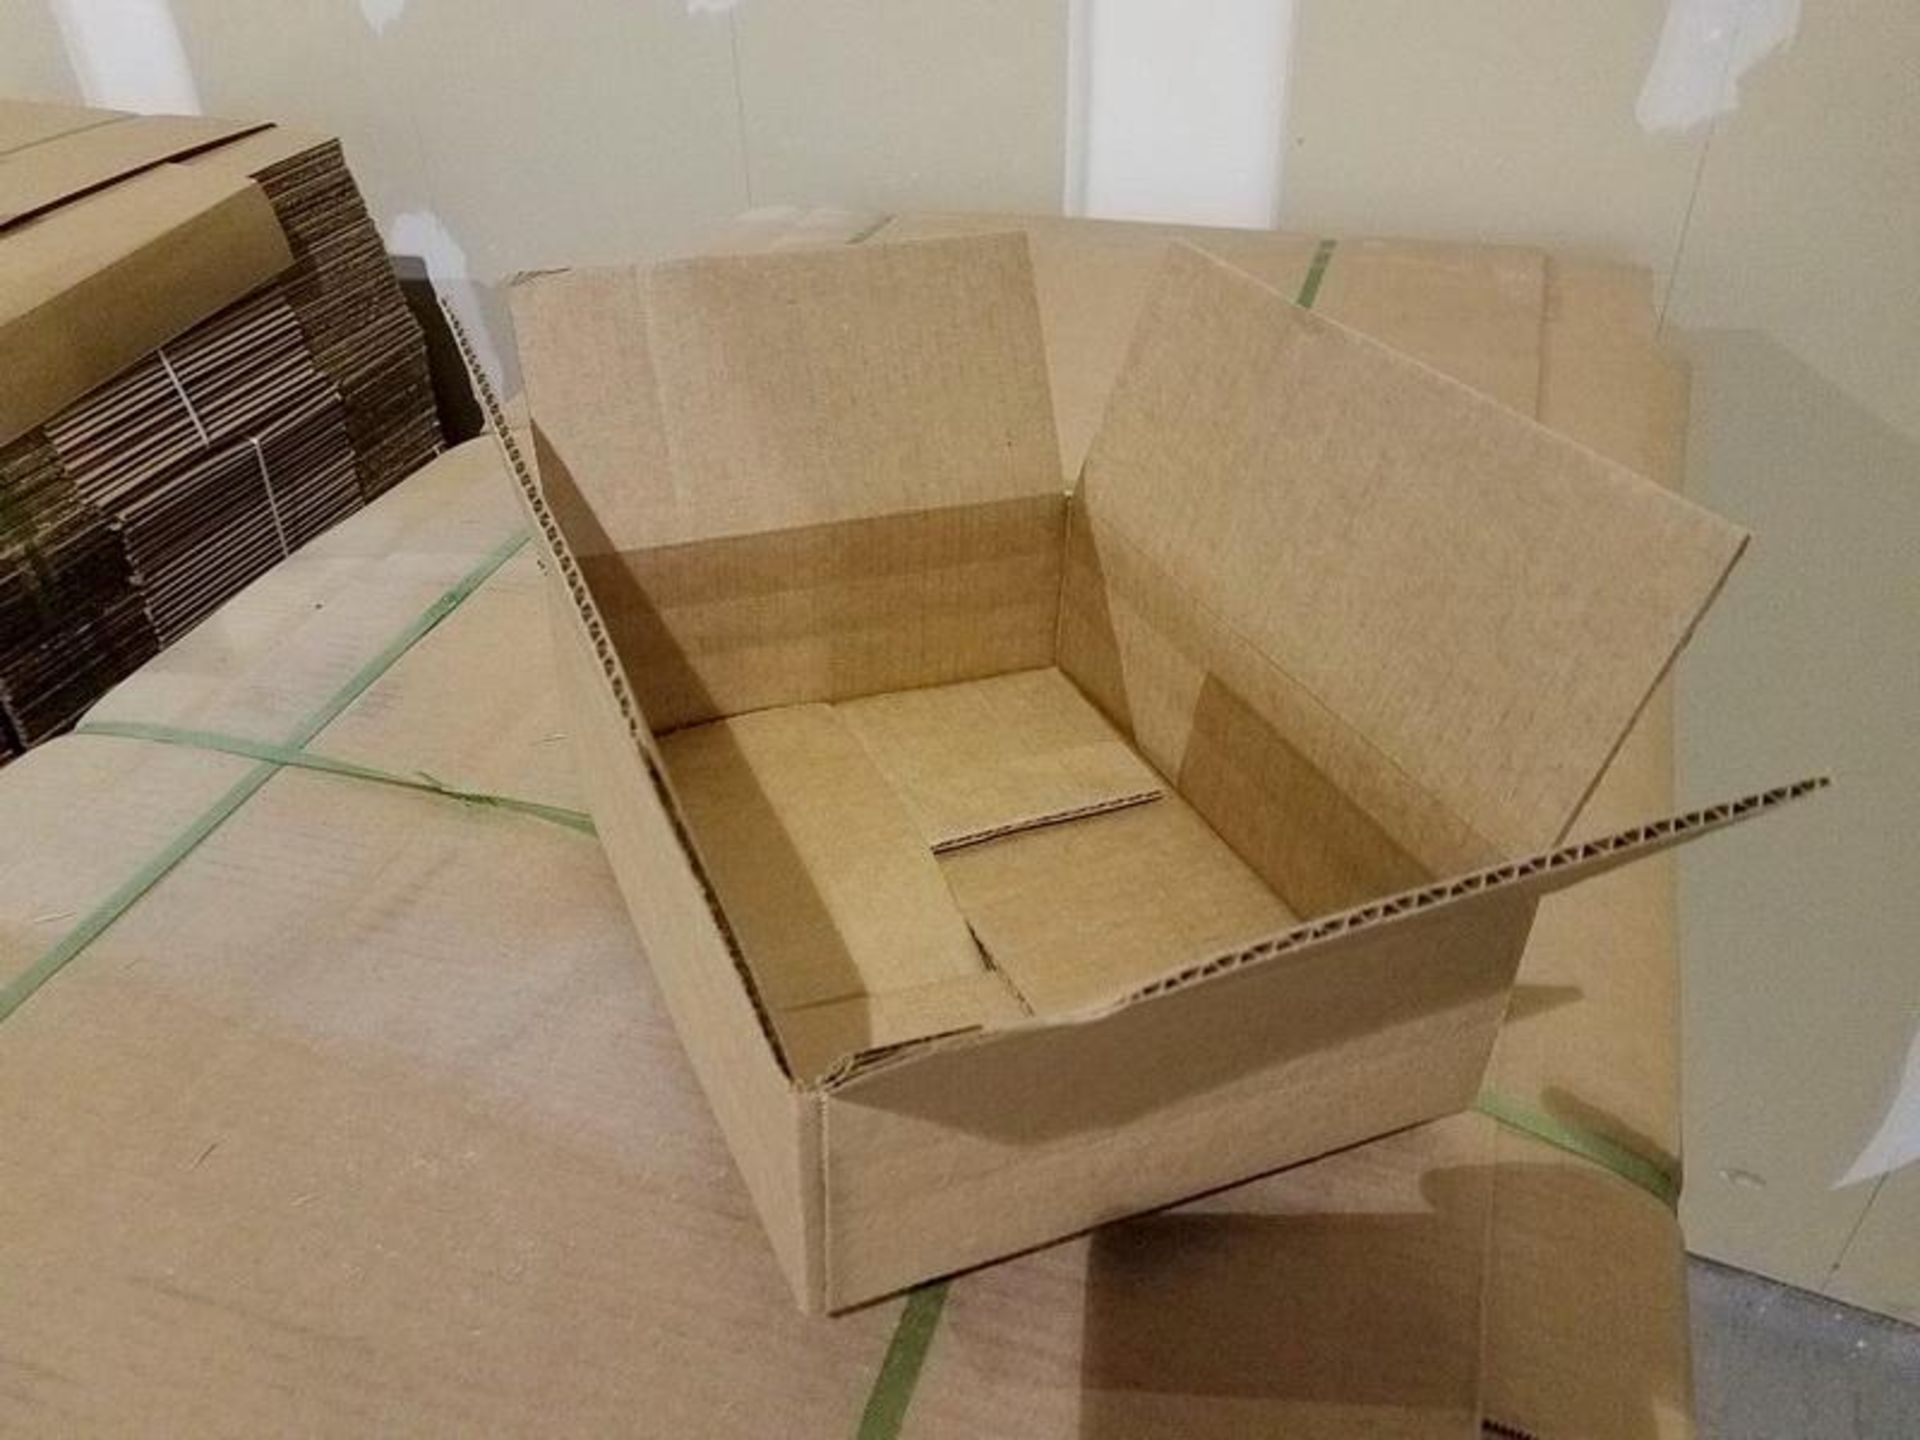 Lot JSP-Multi-3 Corrugated Boxes, 9" x 11.5" x 3.25" Approx. - Image 3 of 3